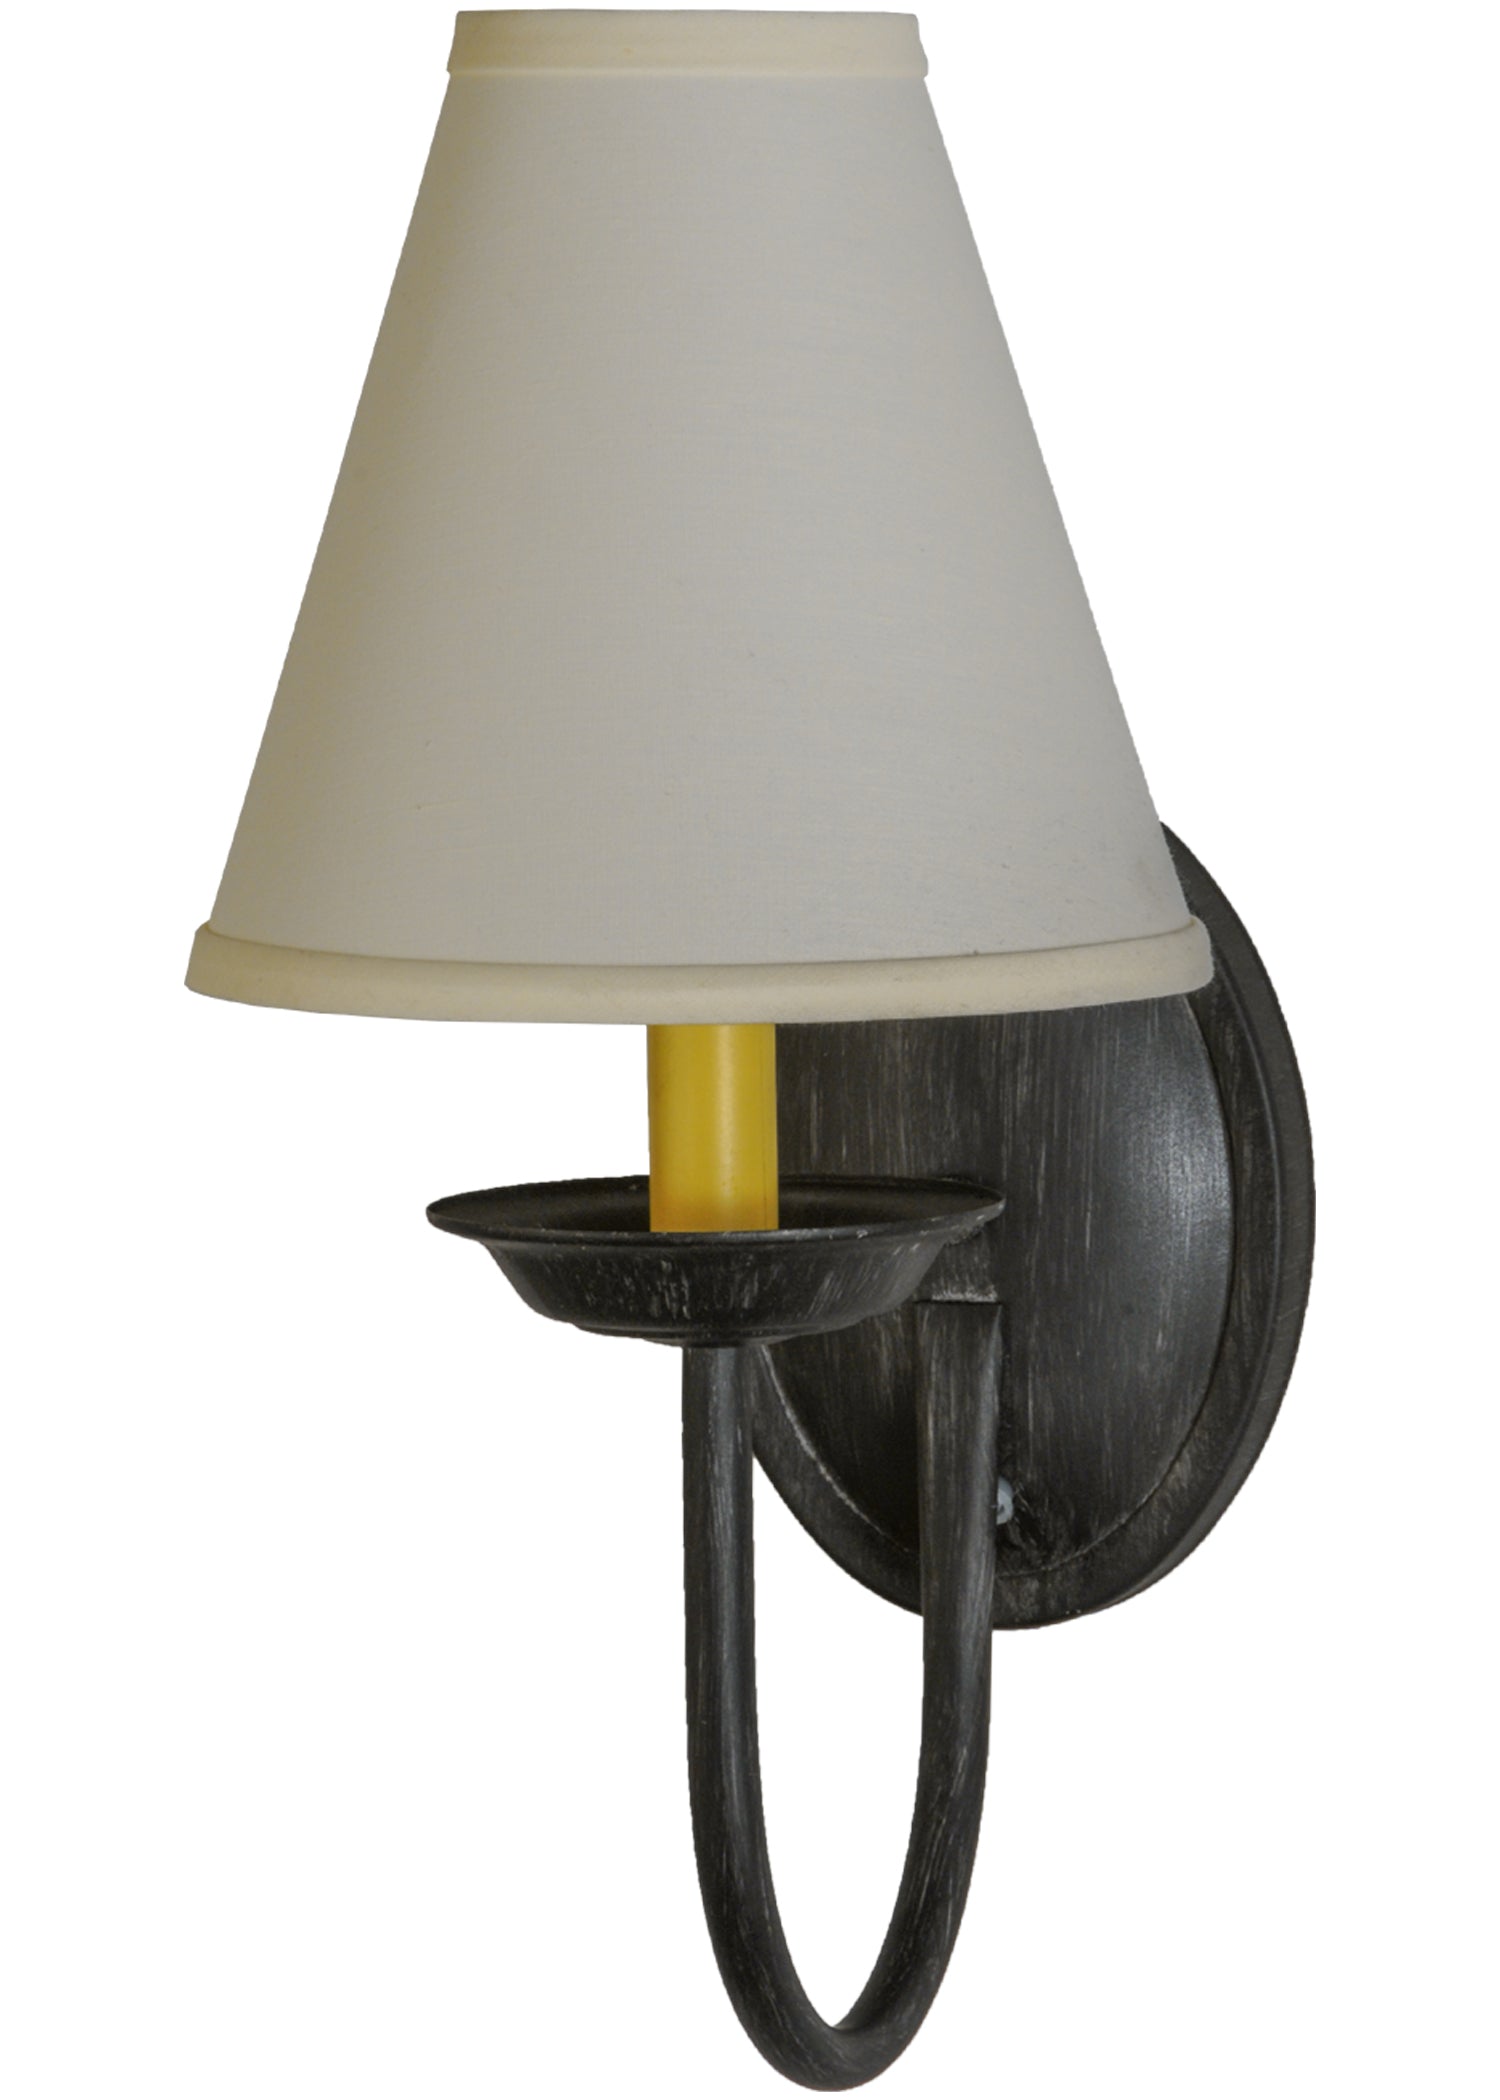 7" Classic Fabric Shade Wall Sconce by 2nd Ave Lighting